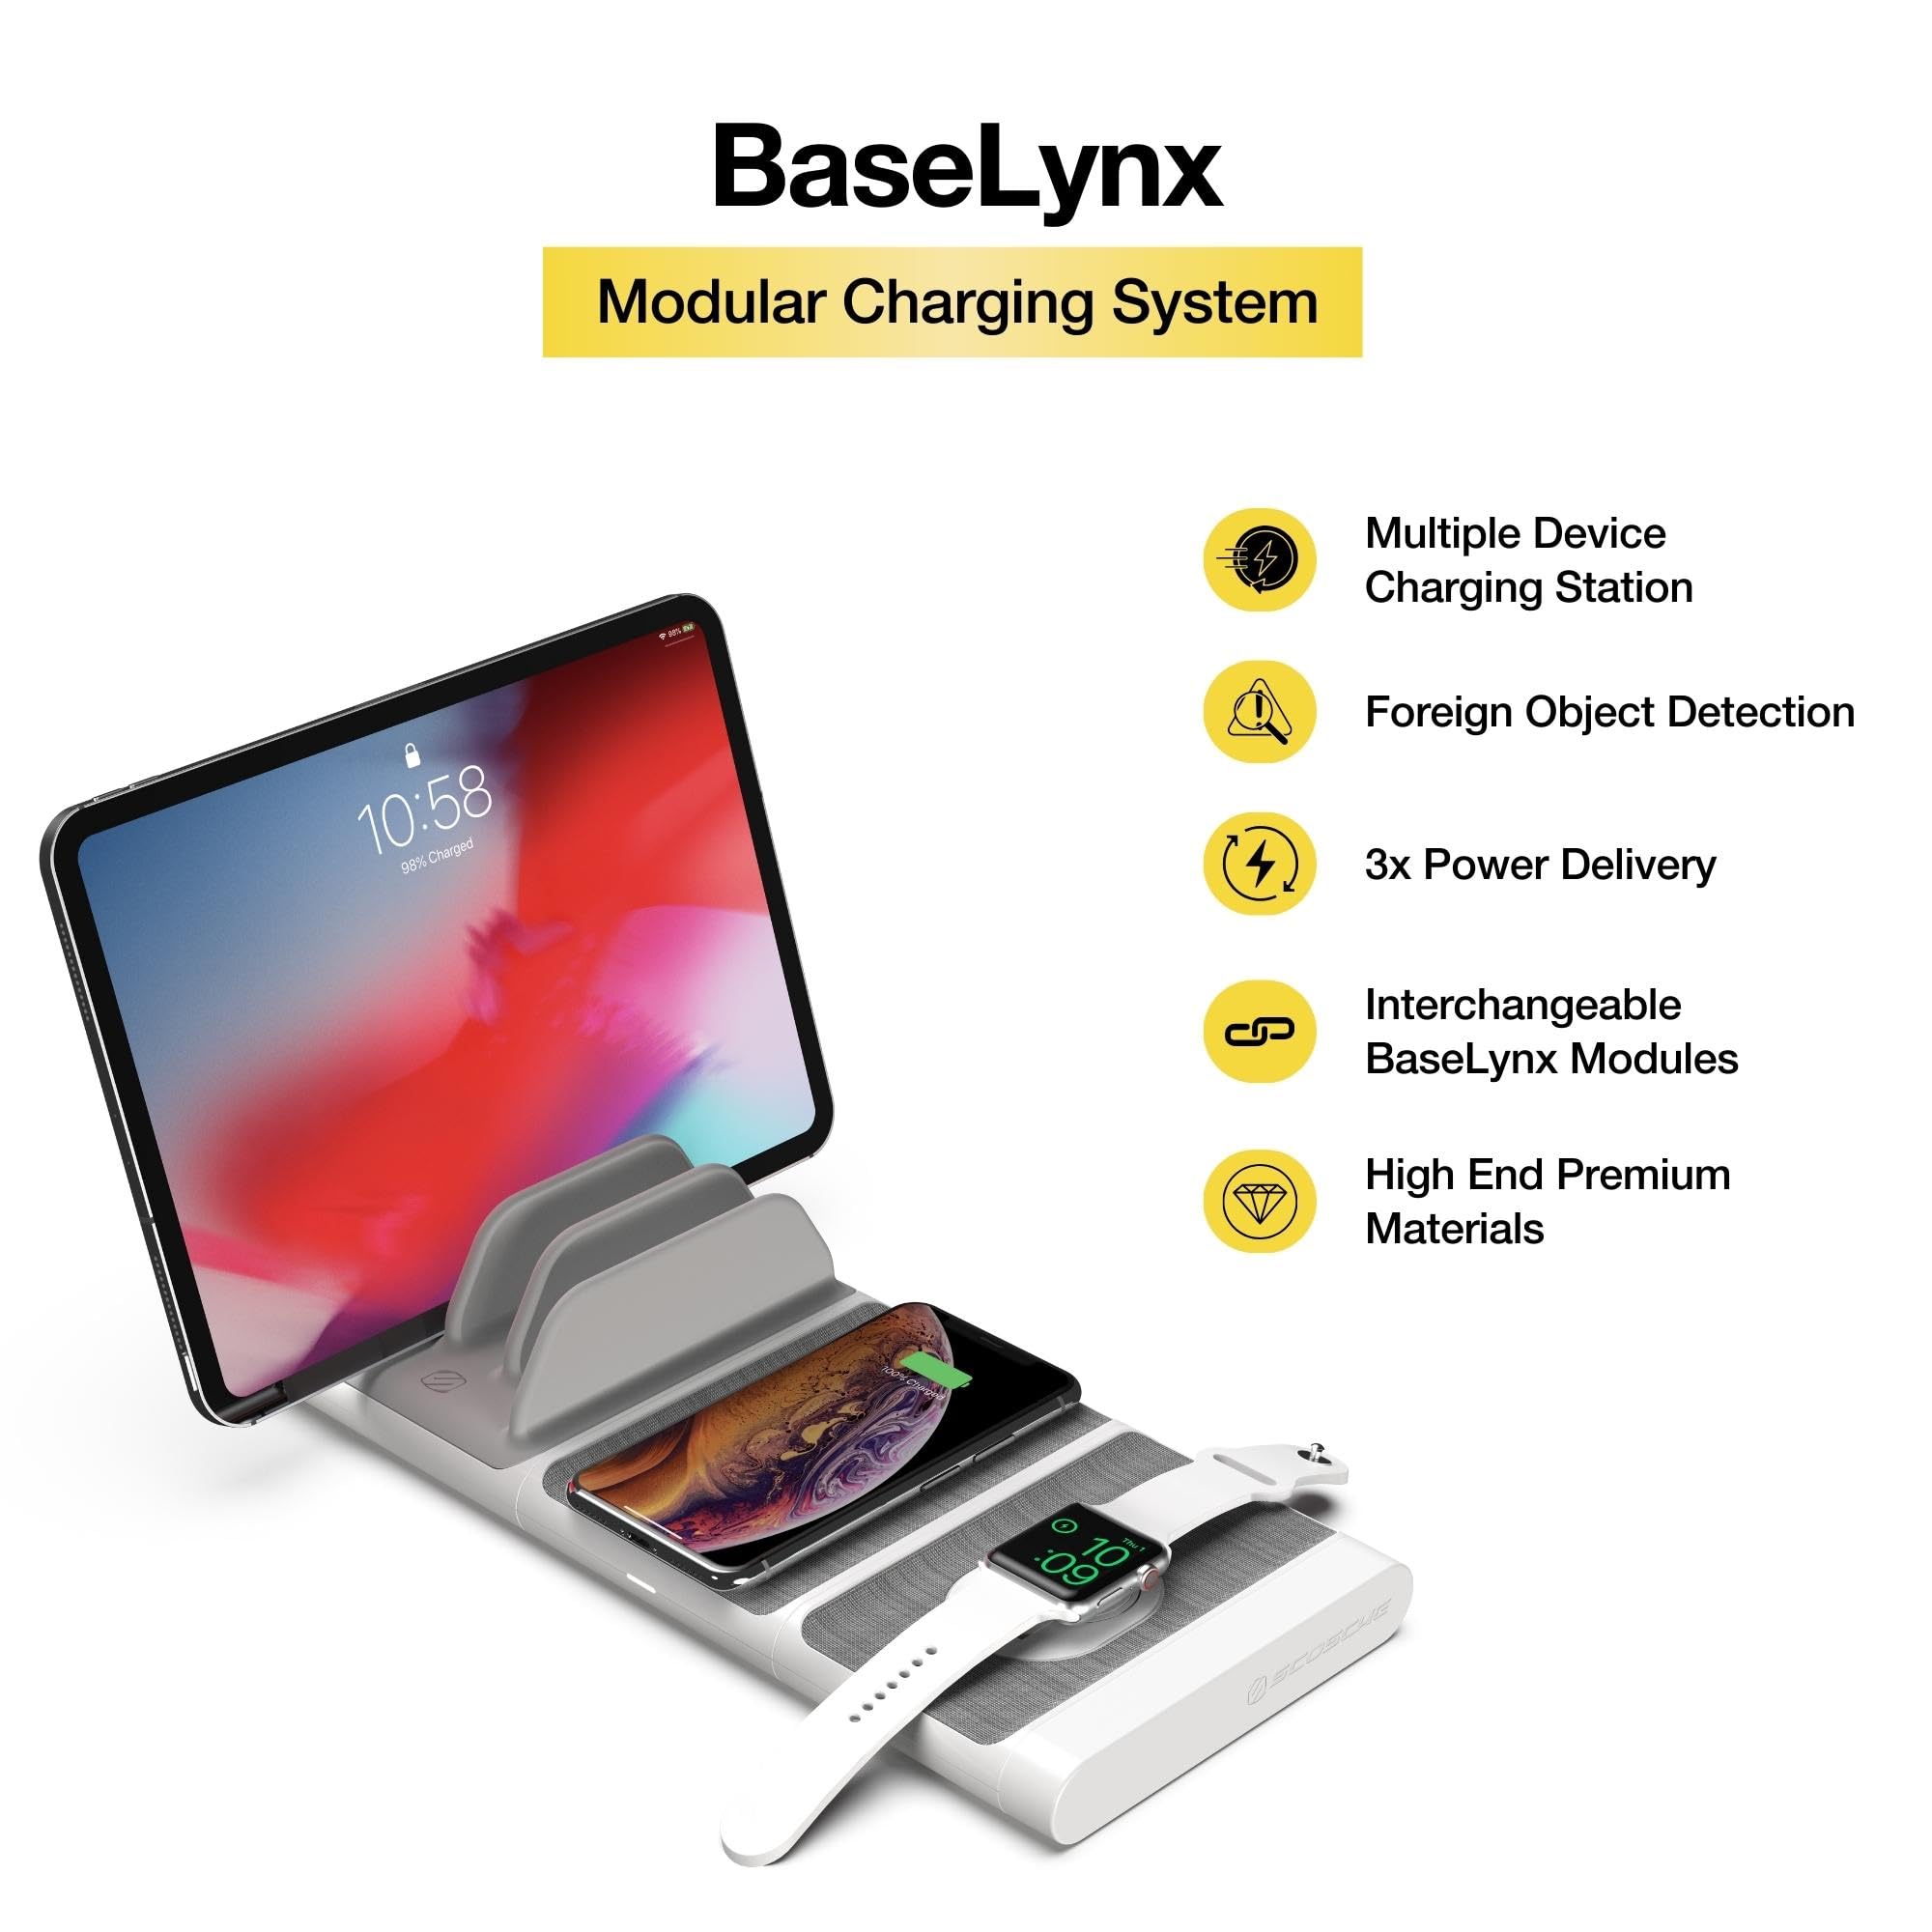 Scosche BLKIT1WT BaseLynx Modular Charging System - Wireless Charging Station with Apple Watch Charger - Qi-Certified Charger - Multi Device Charging Station with USB Ports for Portable Devices, White